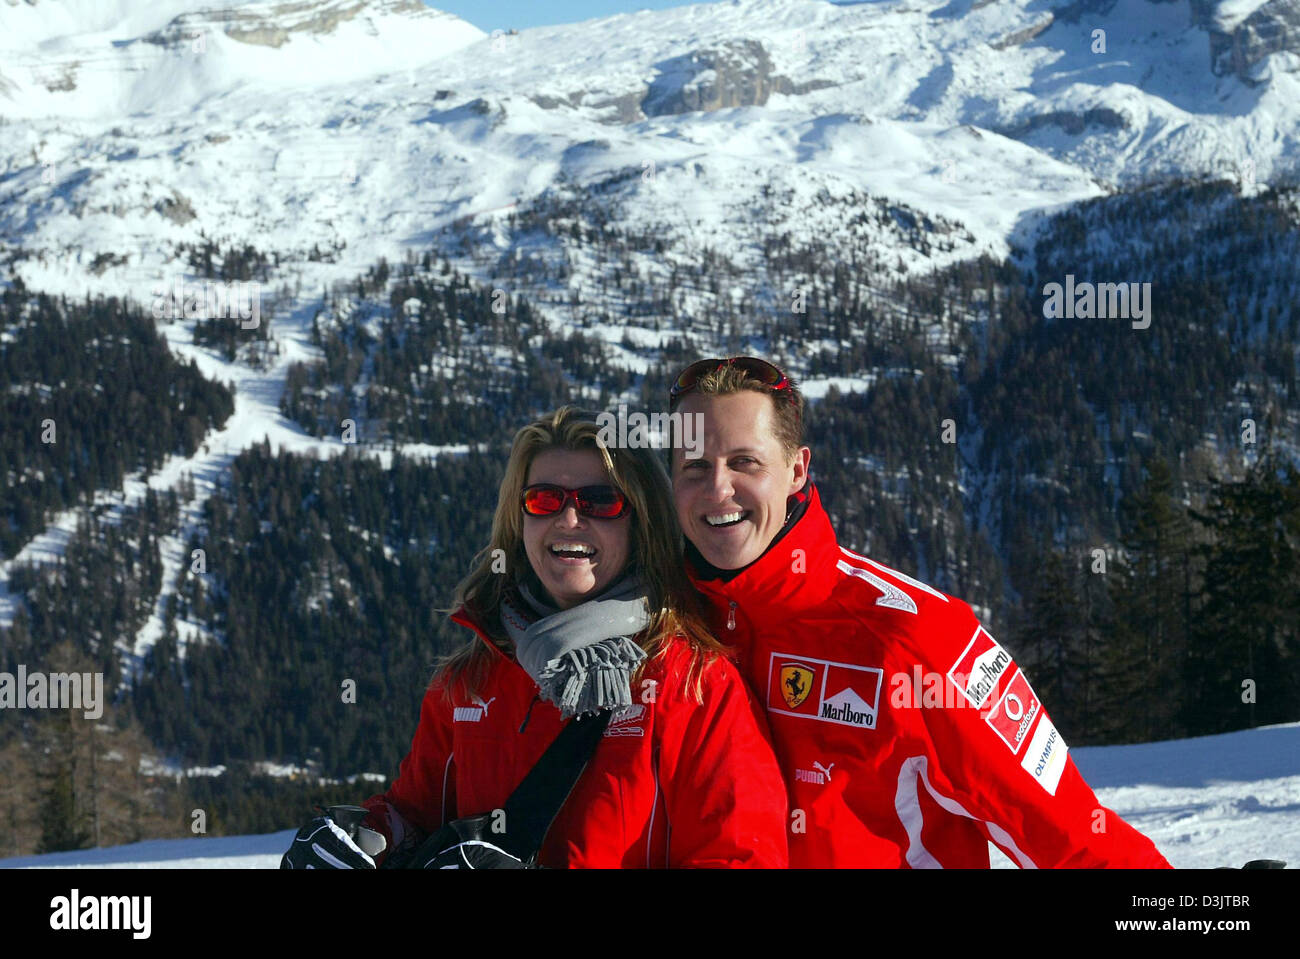 (dpa) - Seven time Formula 1 champion Michael Schumacher (R, team Ferrari) and his wife Corinna smile in front of a mountain panorama shortly after arriving in the ski resort of Madonna di Campiglio, Italy, 11 January 2005. The Ferrari team got together for its traditional ski vacation in the Italian Alps. (ITALY OUT) Stock Photo